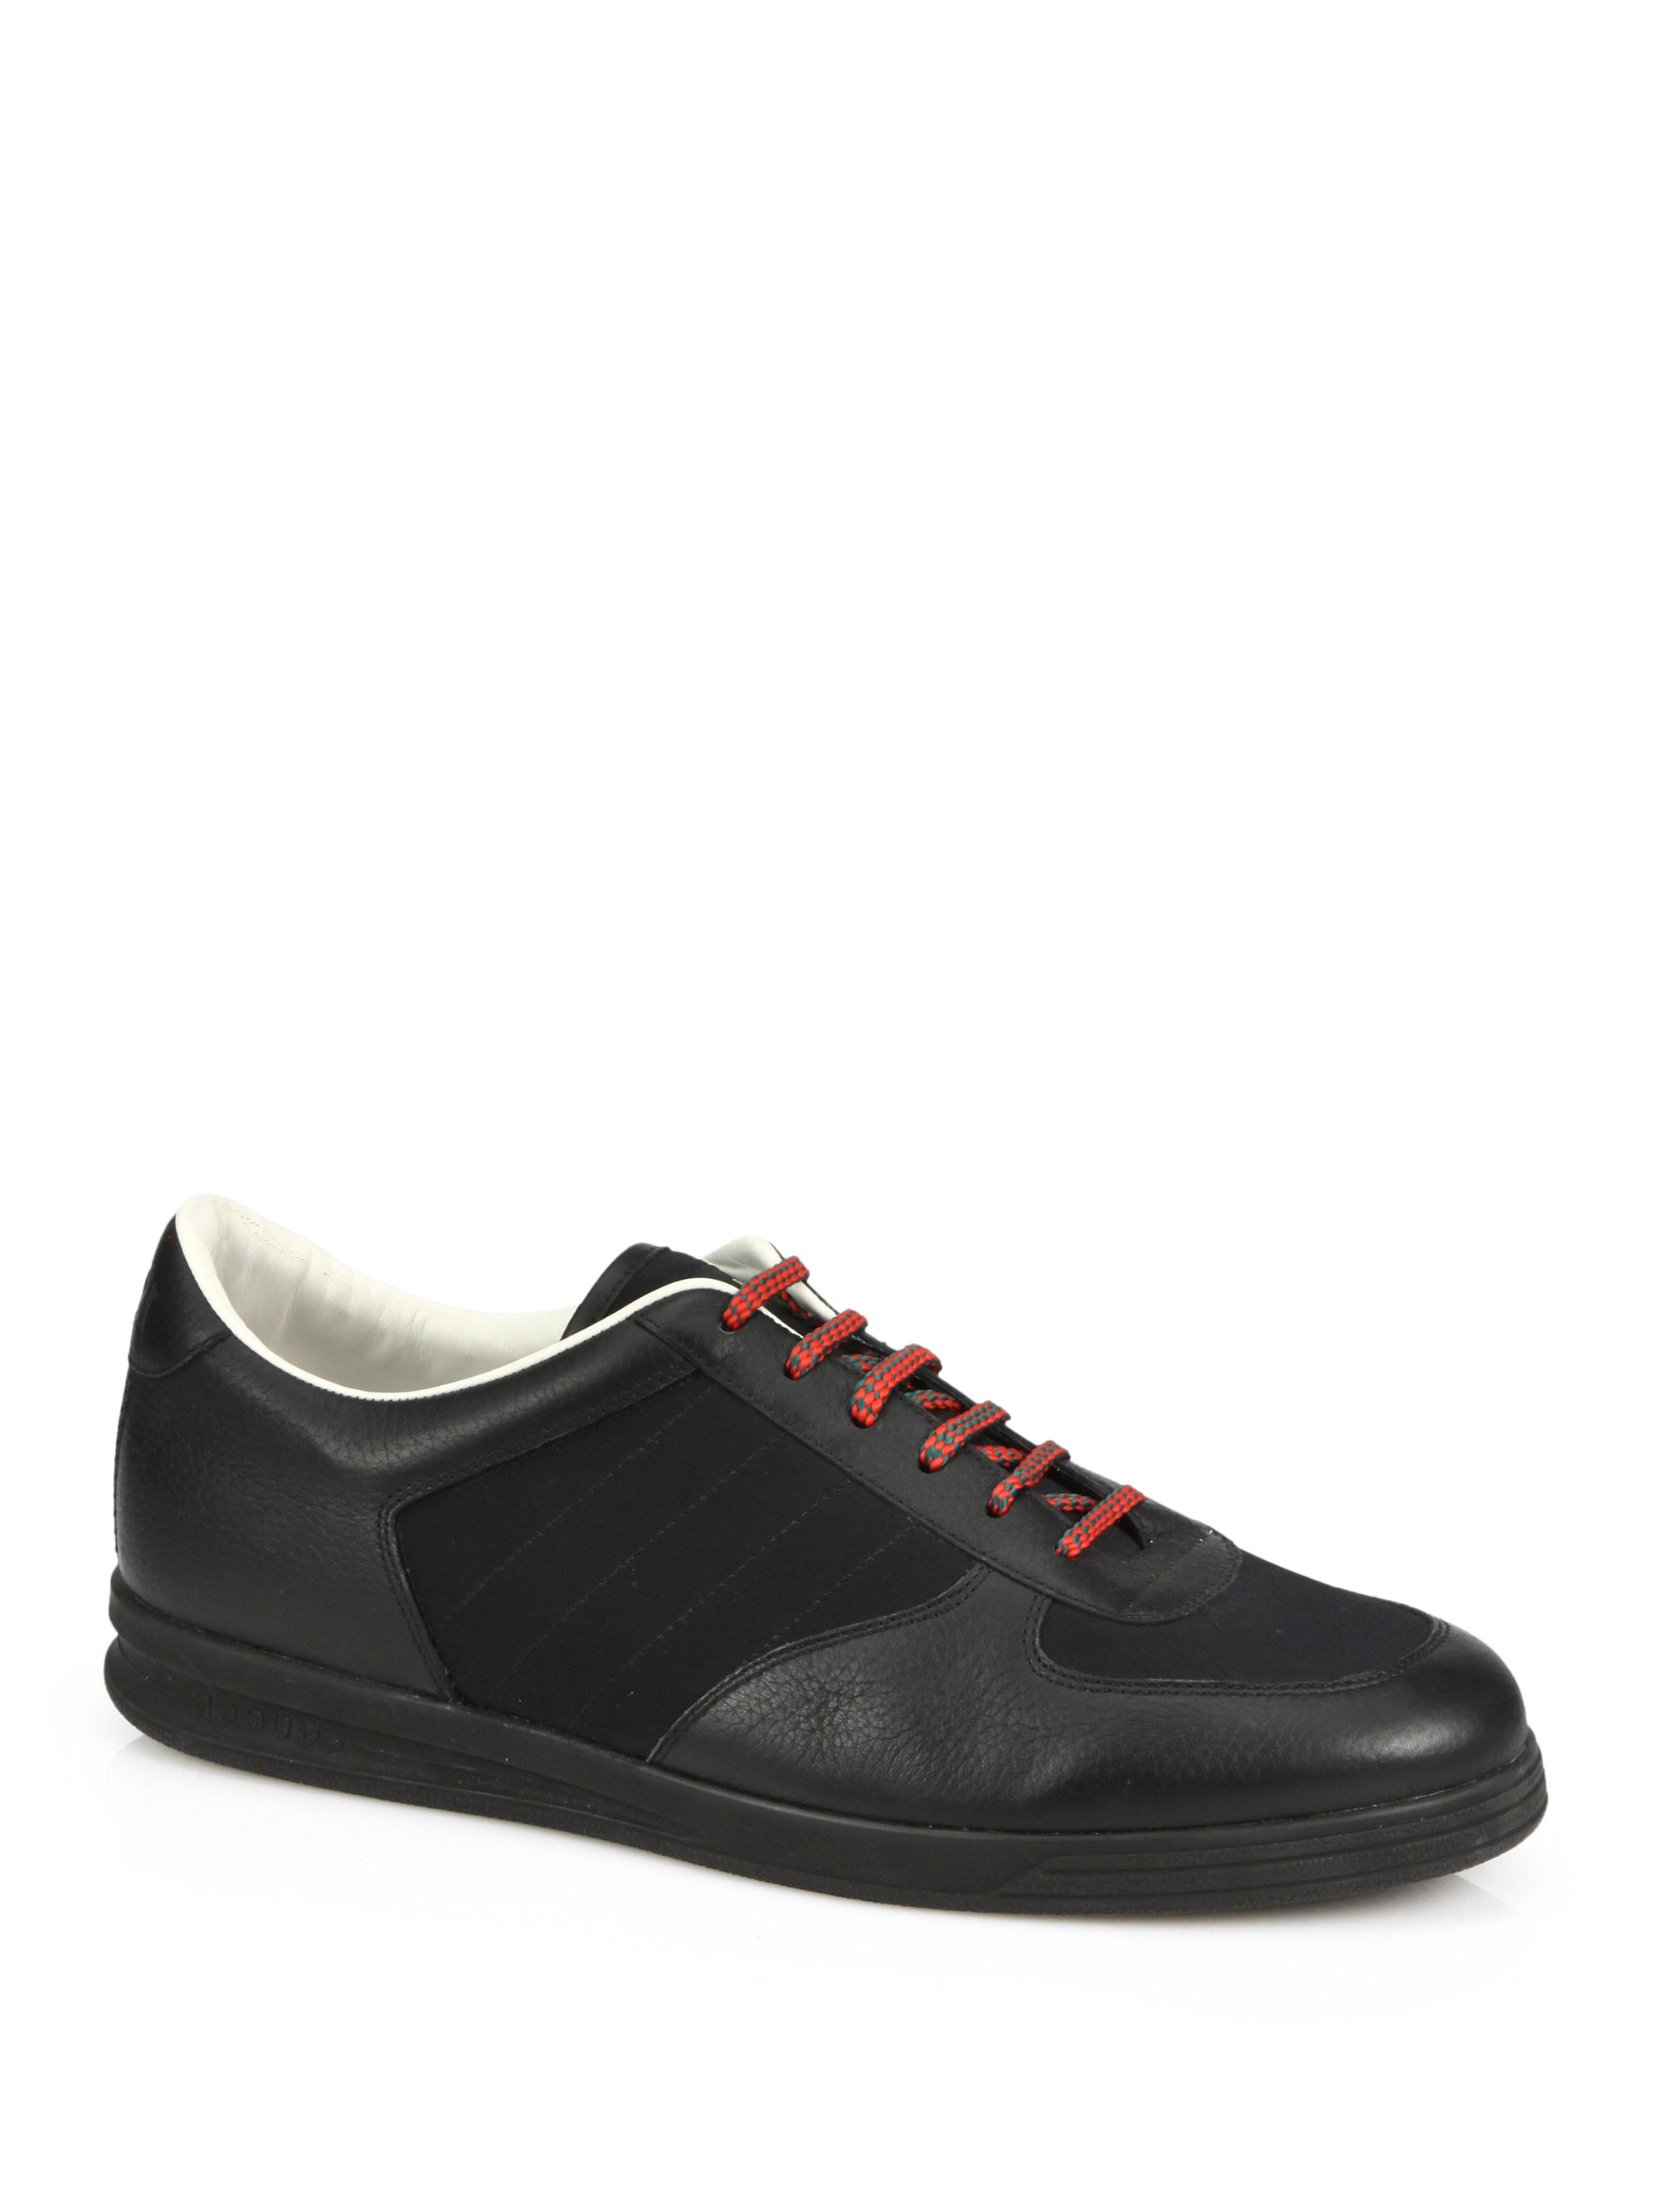 Gucci 1984 Leather Anniversary Sneakers in Black for Men | Lyst